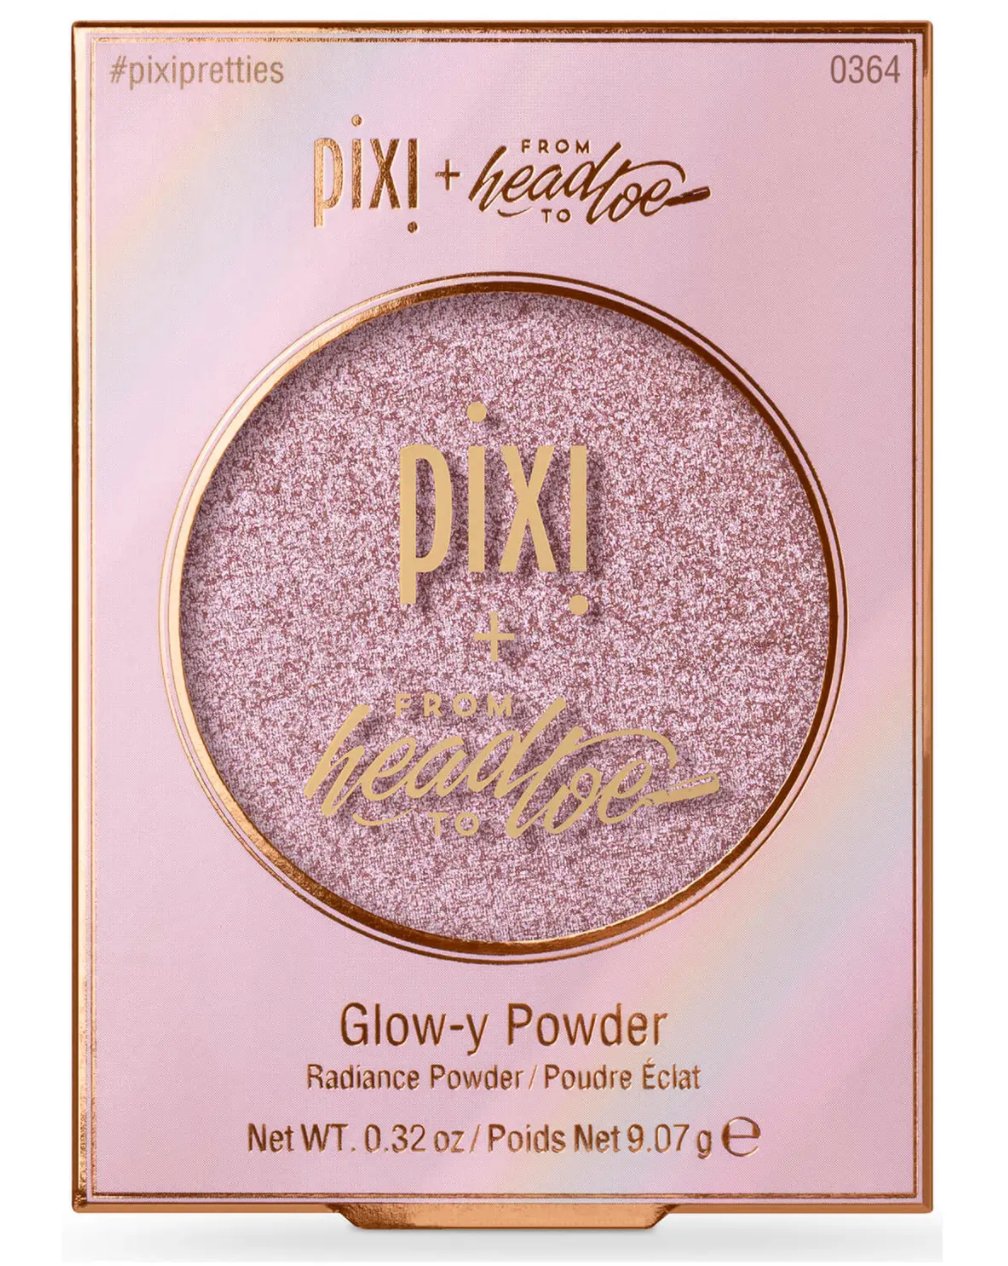 PIXI From Head to Toe Glow-y Powder 10.21g - The Face Method